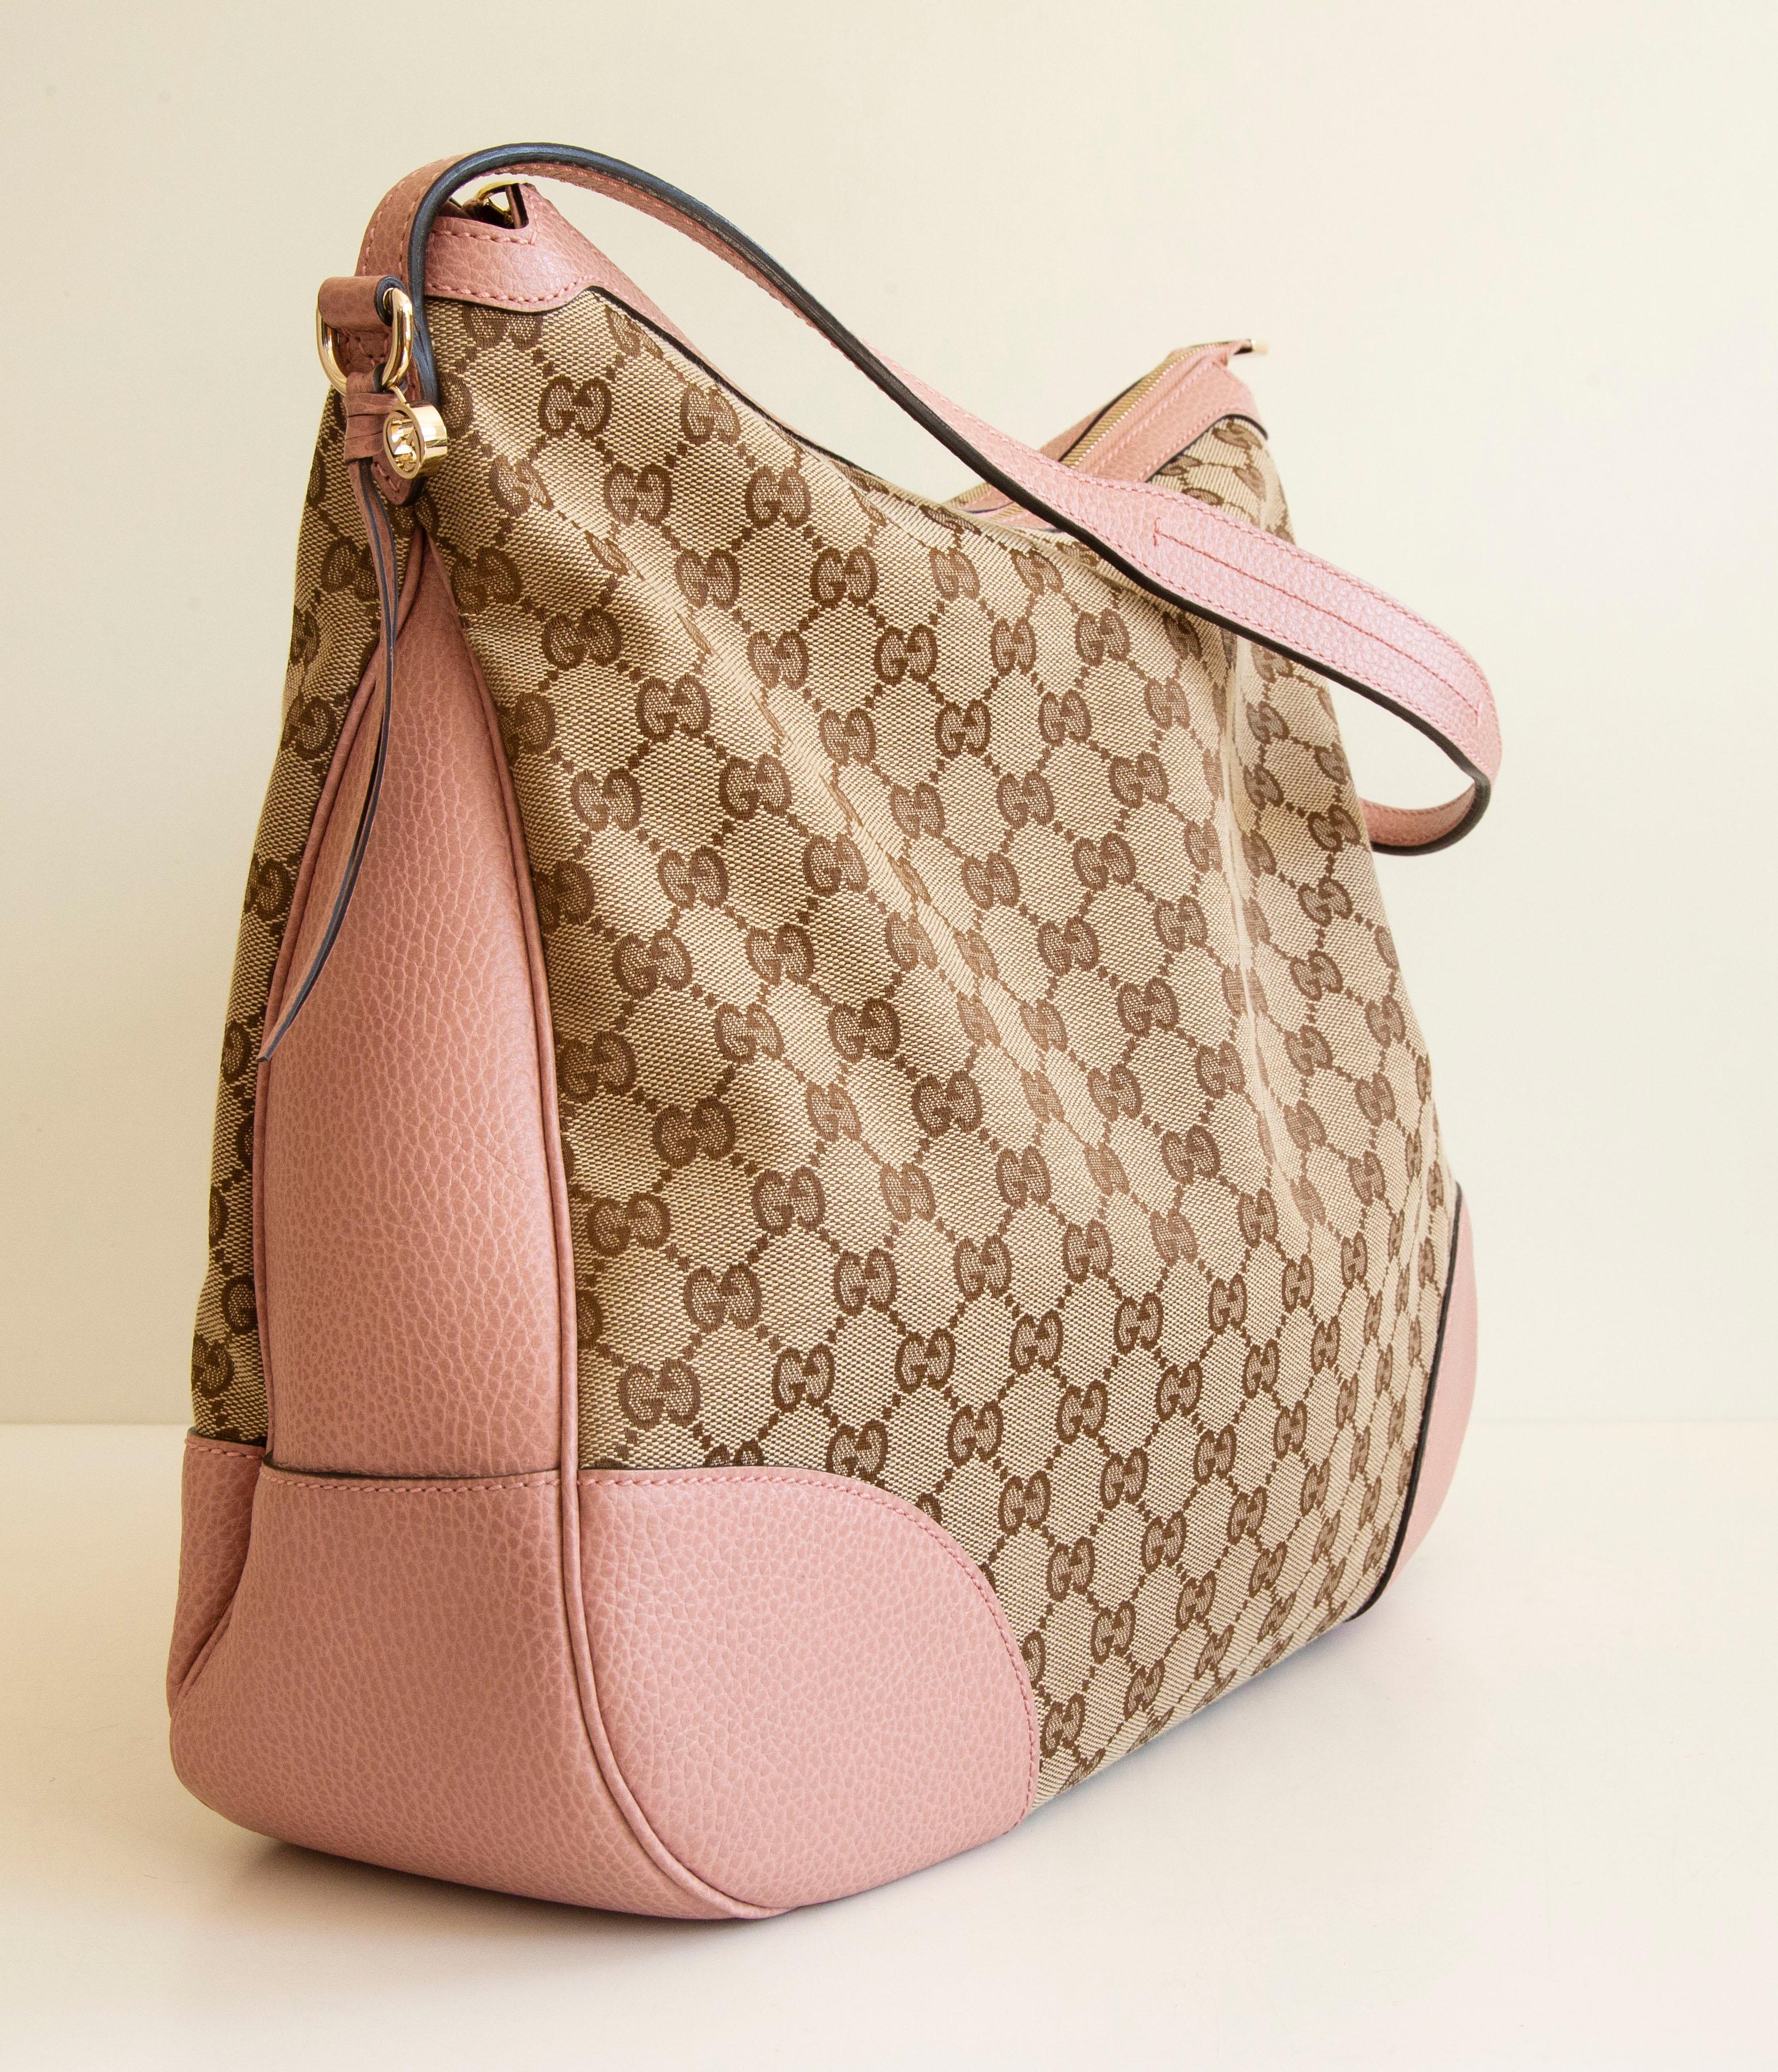 Women's or Men's Gucci Large Bree Hobo Bag in GG Canvas with Pink Leather Trim For Sale